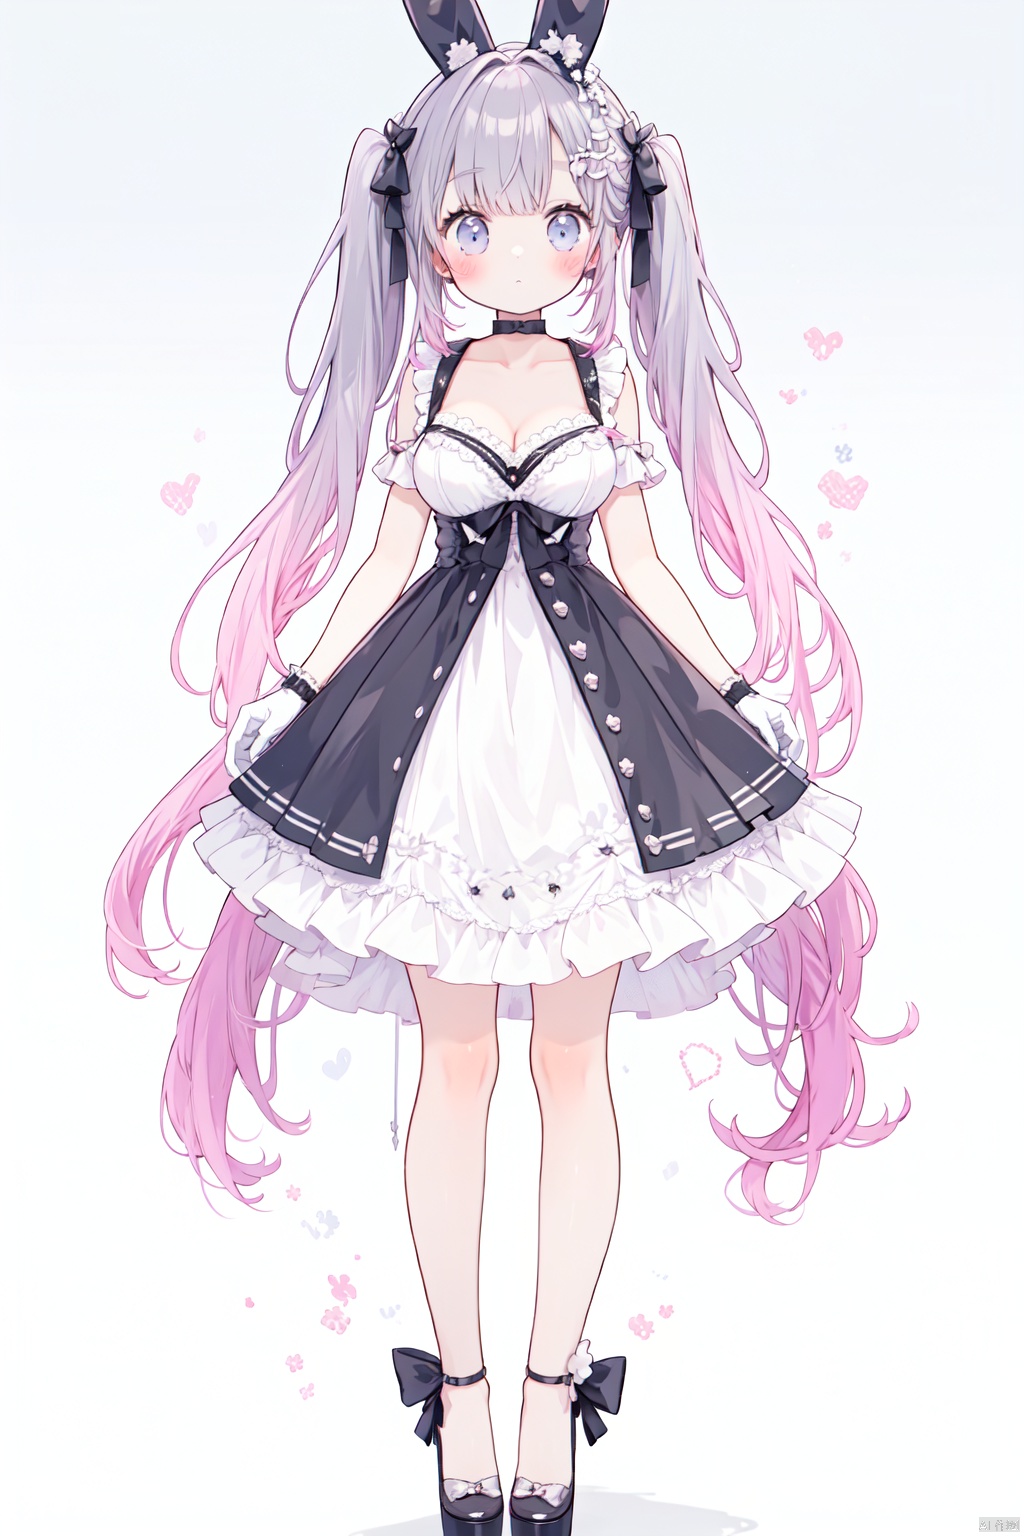  loli,petite,2_girls, bow, breasts, blush, dress, full_body, gloves, gradient, gradient_background, grey_background, blurry, blurry_background, cat, cleavage, collarbone, Light and shadow contrast, long_hair, black bow, bunny_rabbit, big breats, standing, underwear, Sheath dress, white_gloves, white_legwear, CJ-BWD